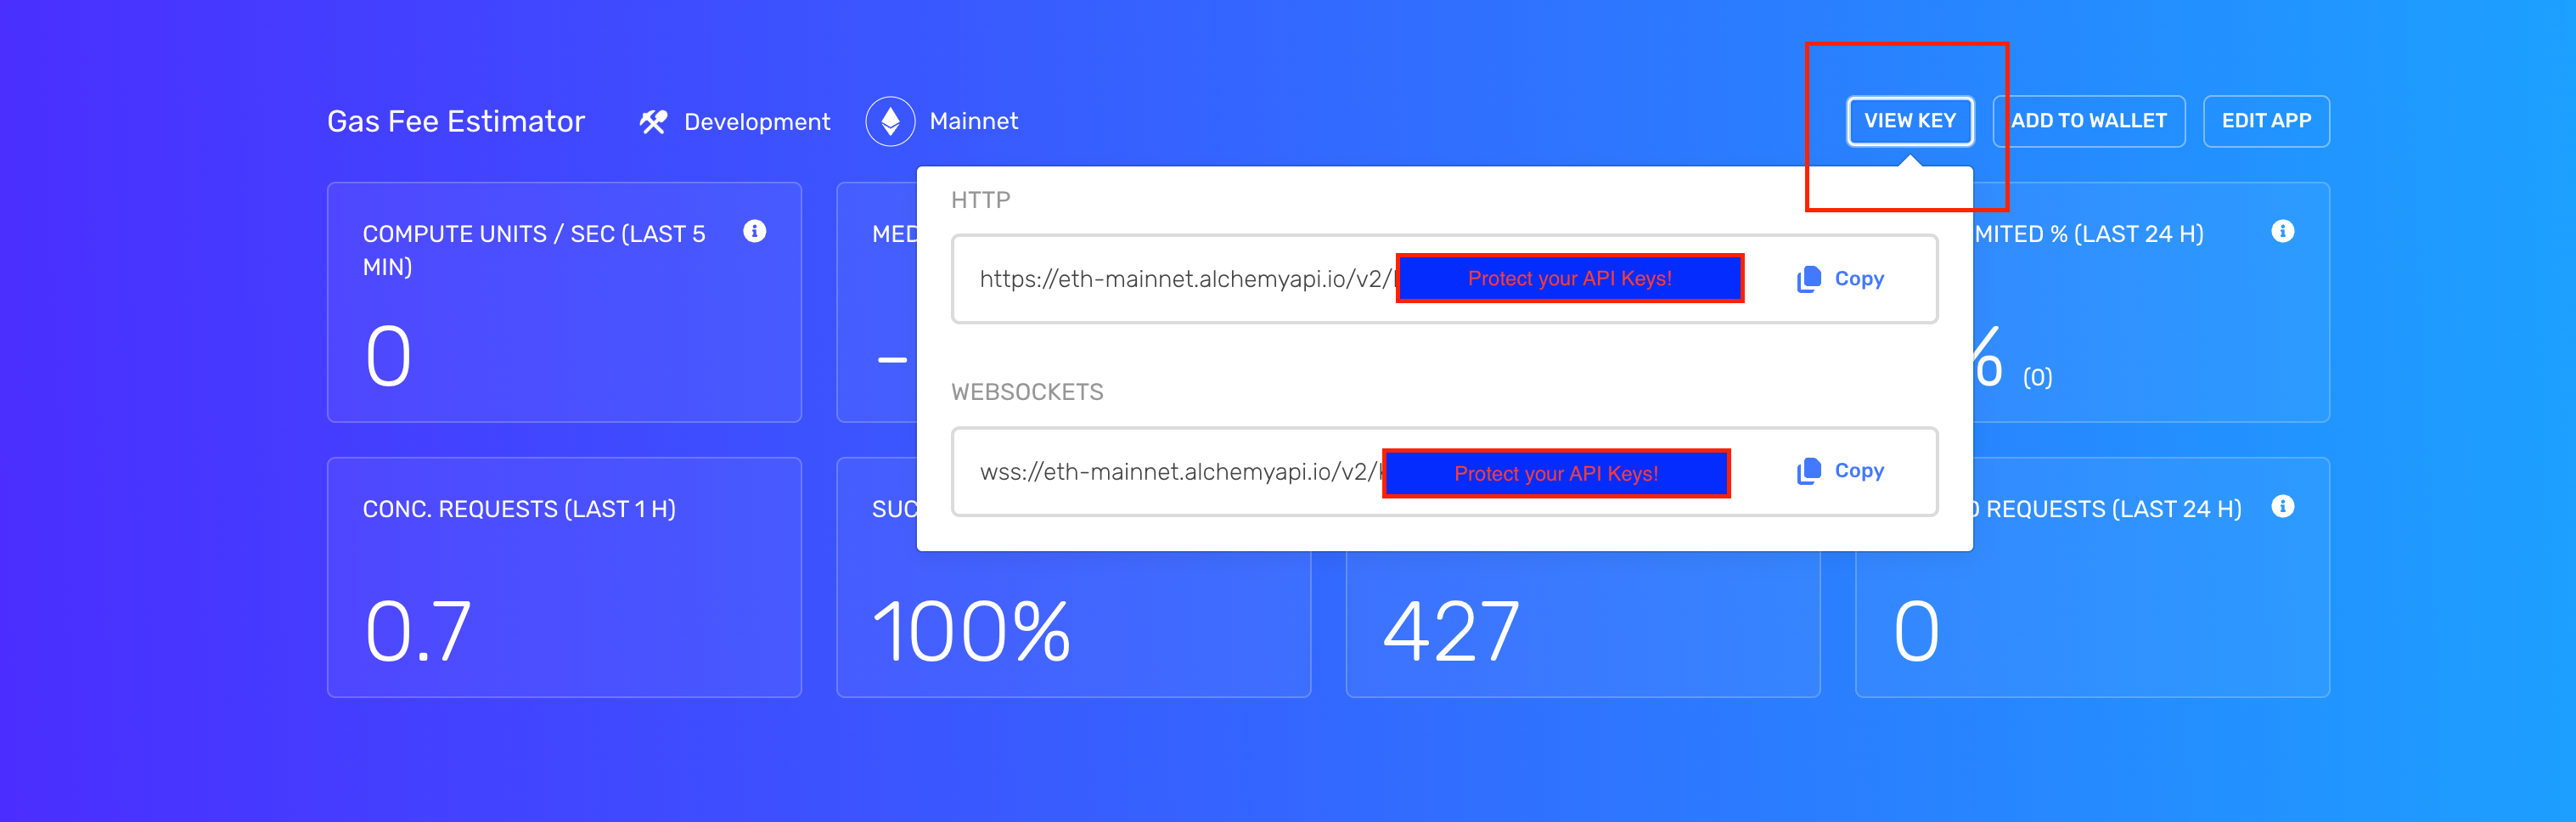 Get an API Key from your app dashboard